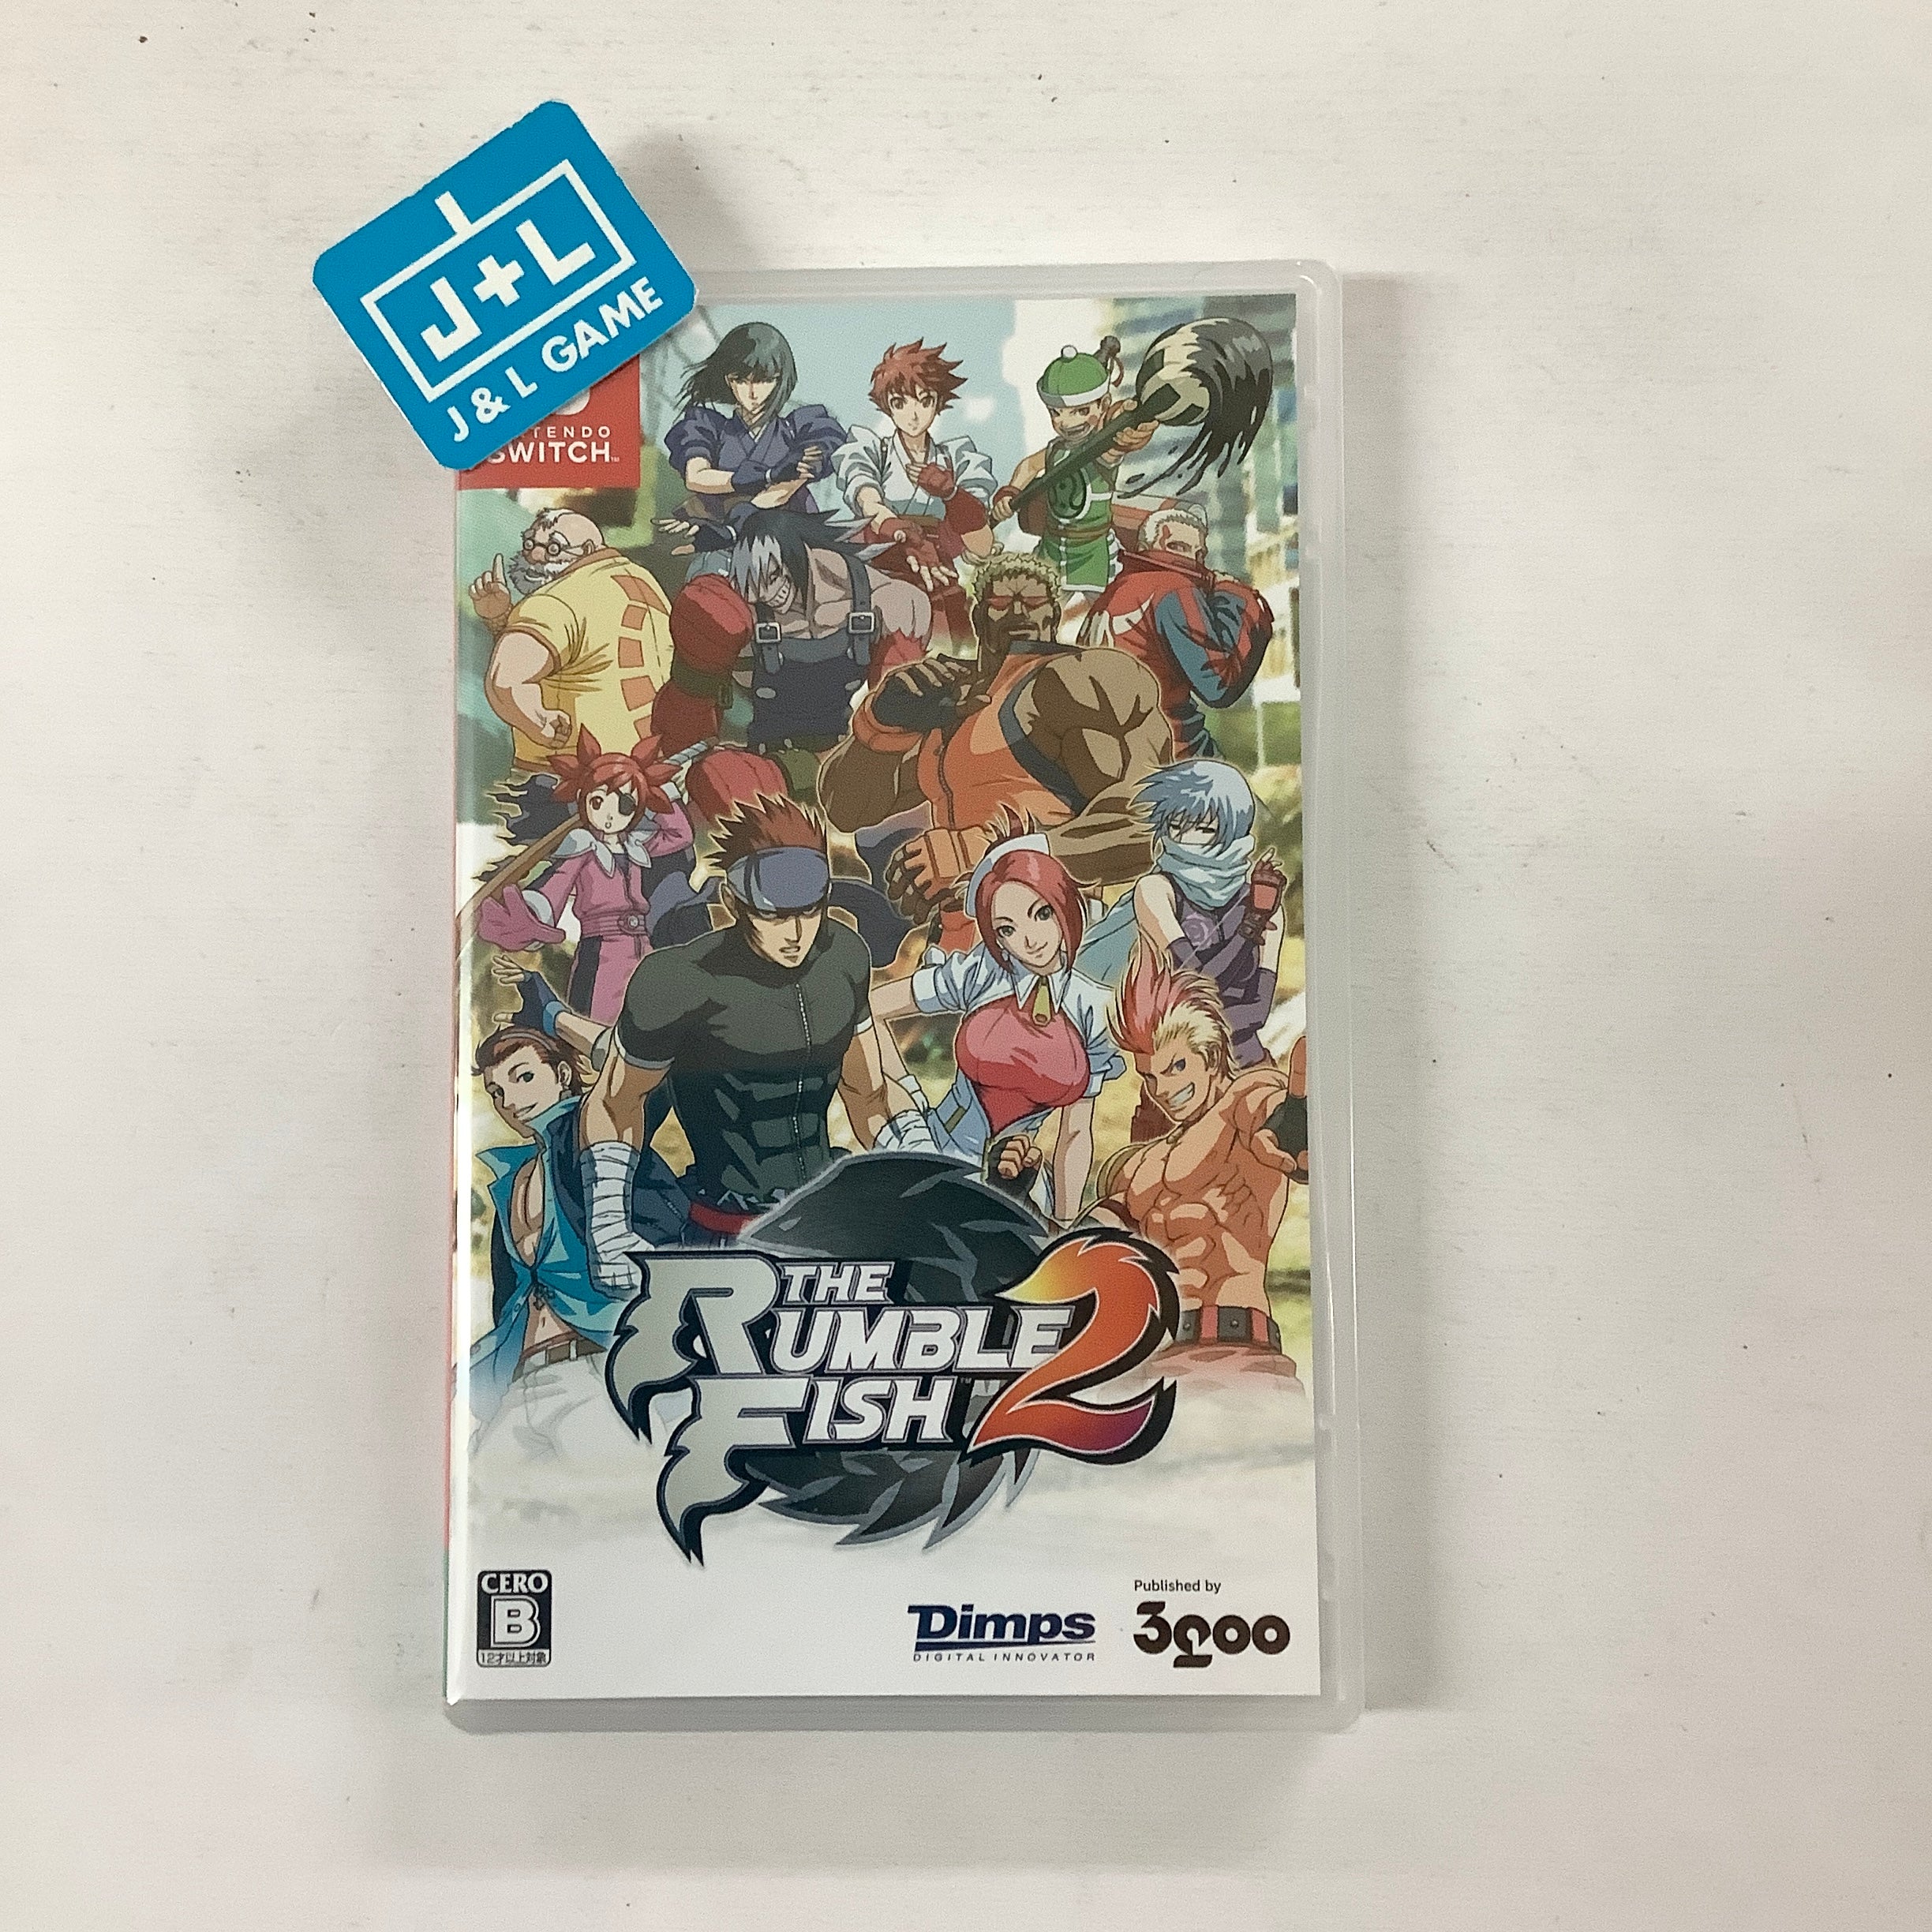 The Rumble Fish 2 - (NSW) Nintendo Switch (Japanese Import) Video Games 3goo   